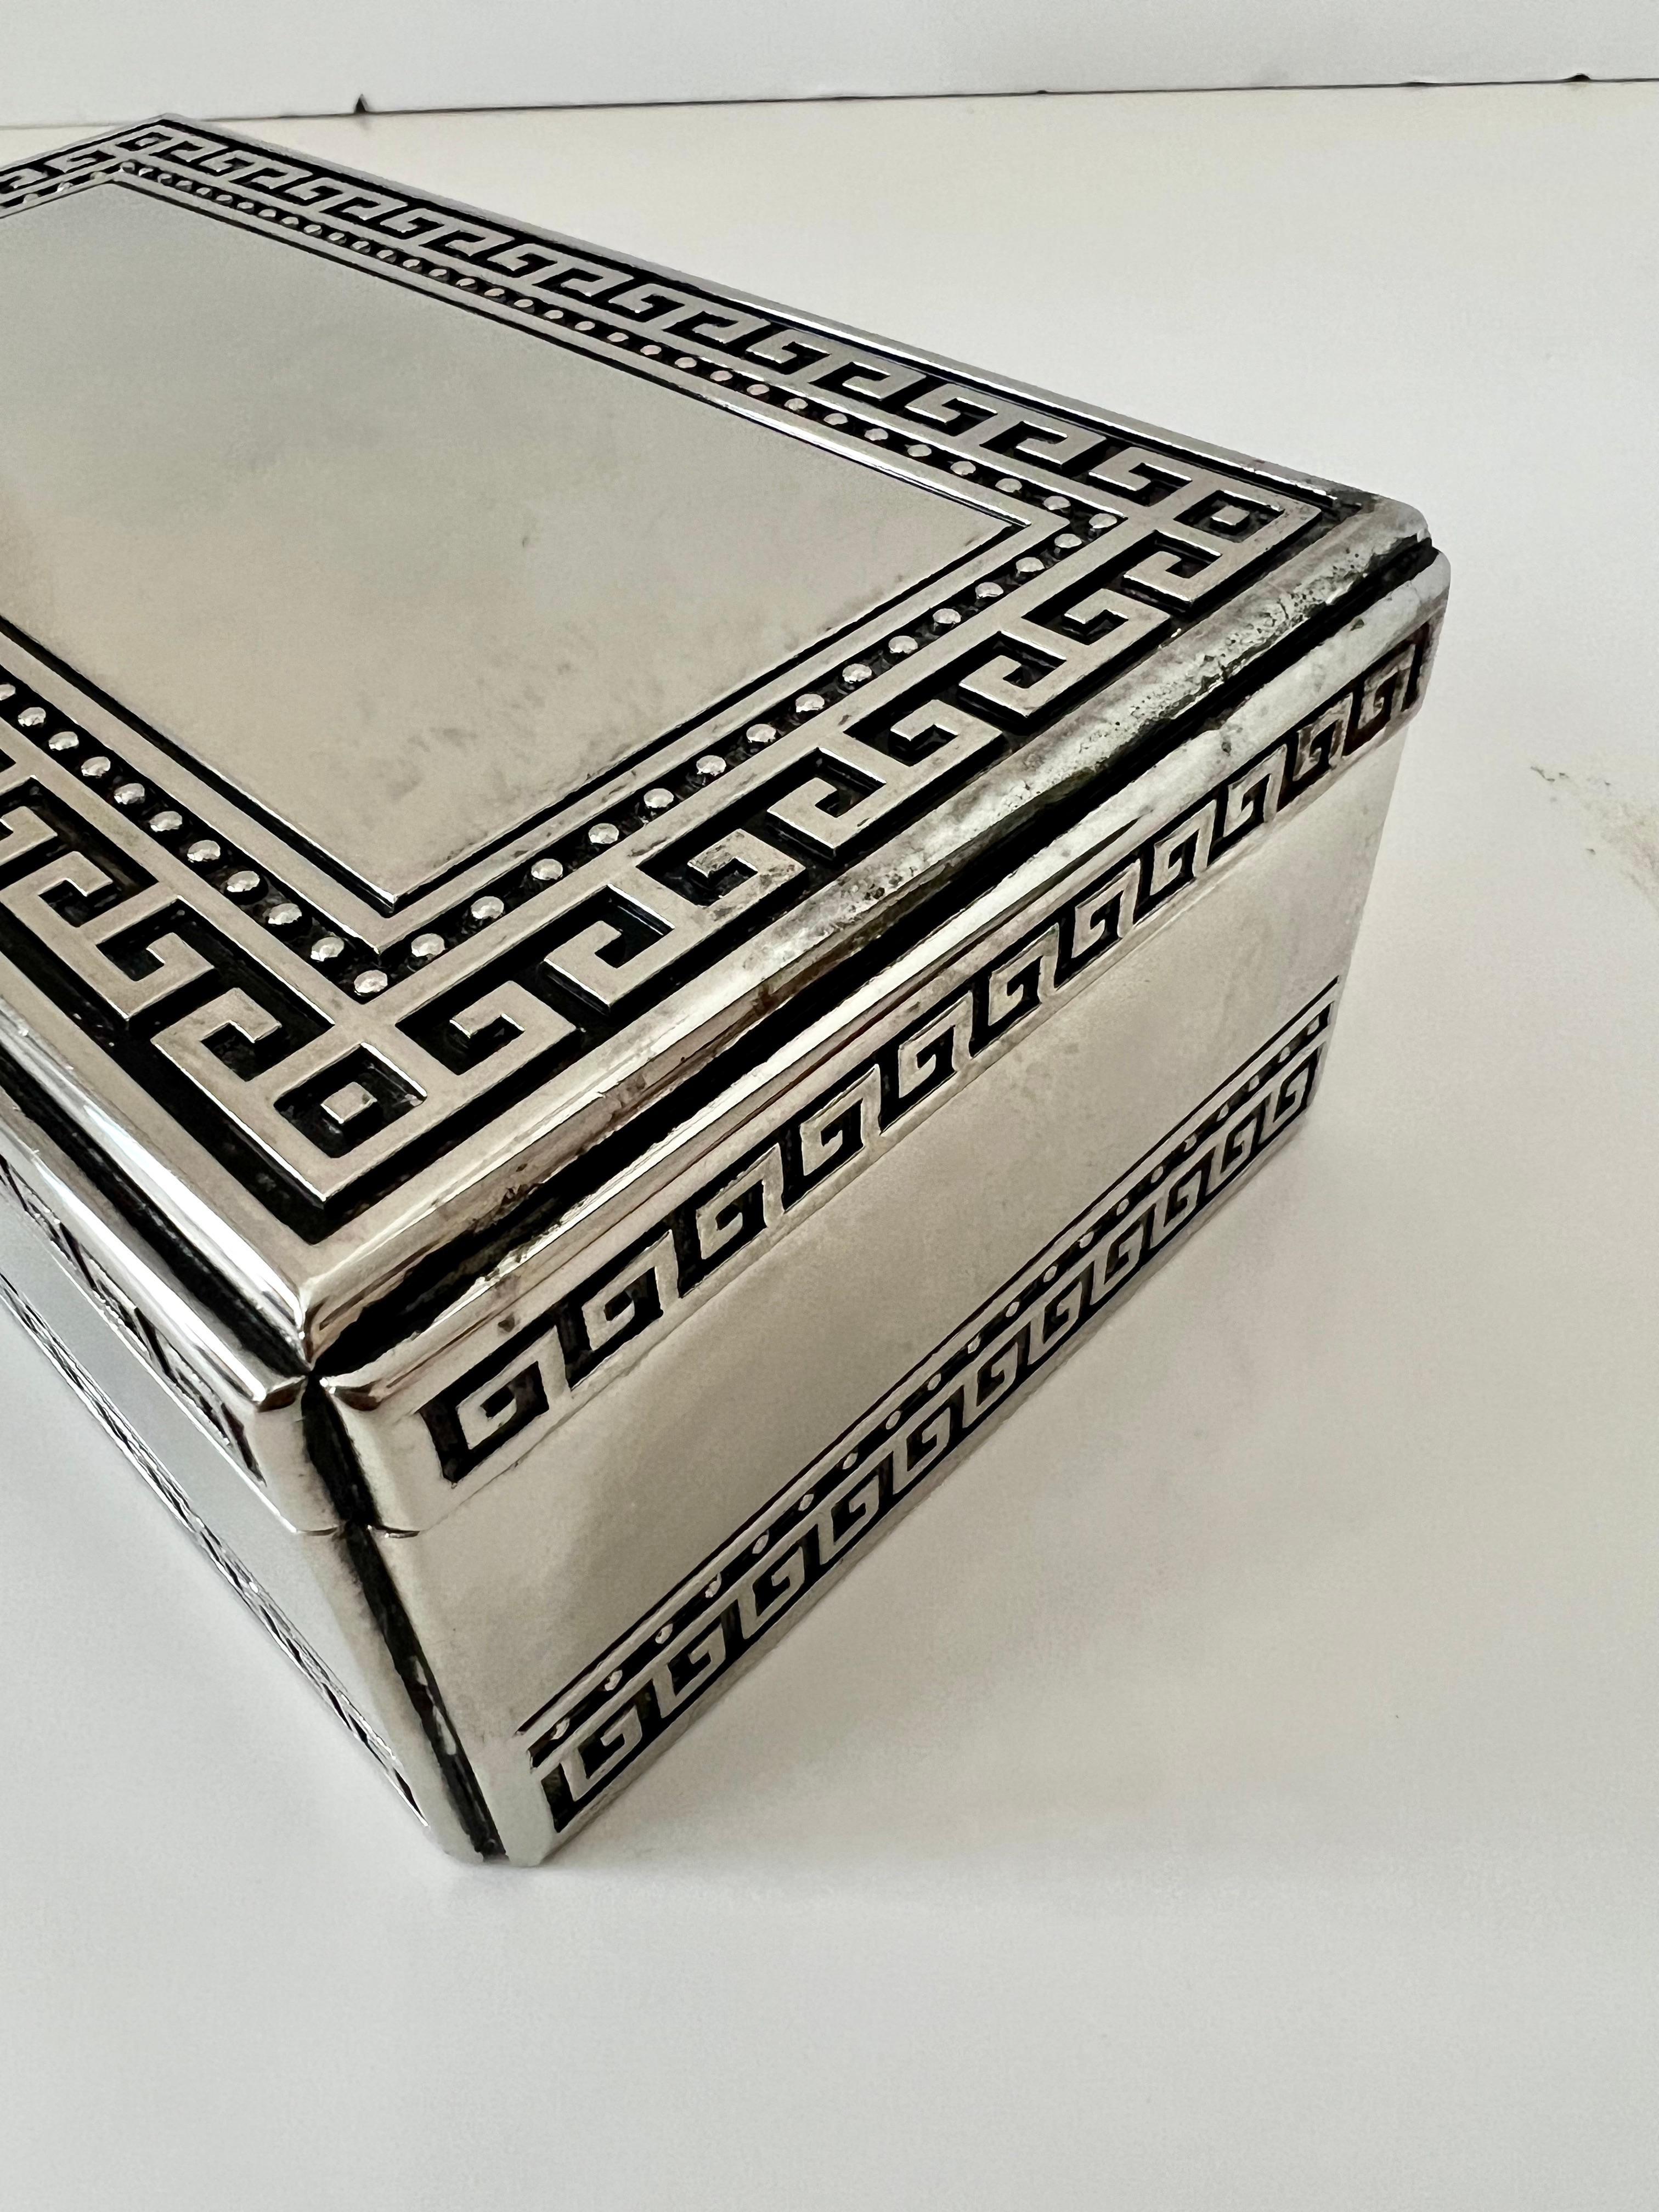 20th Century Silver Plate Hinged Lidded Box with Greek Key Details and Fabric Lined